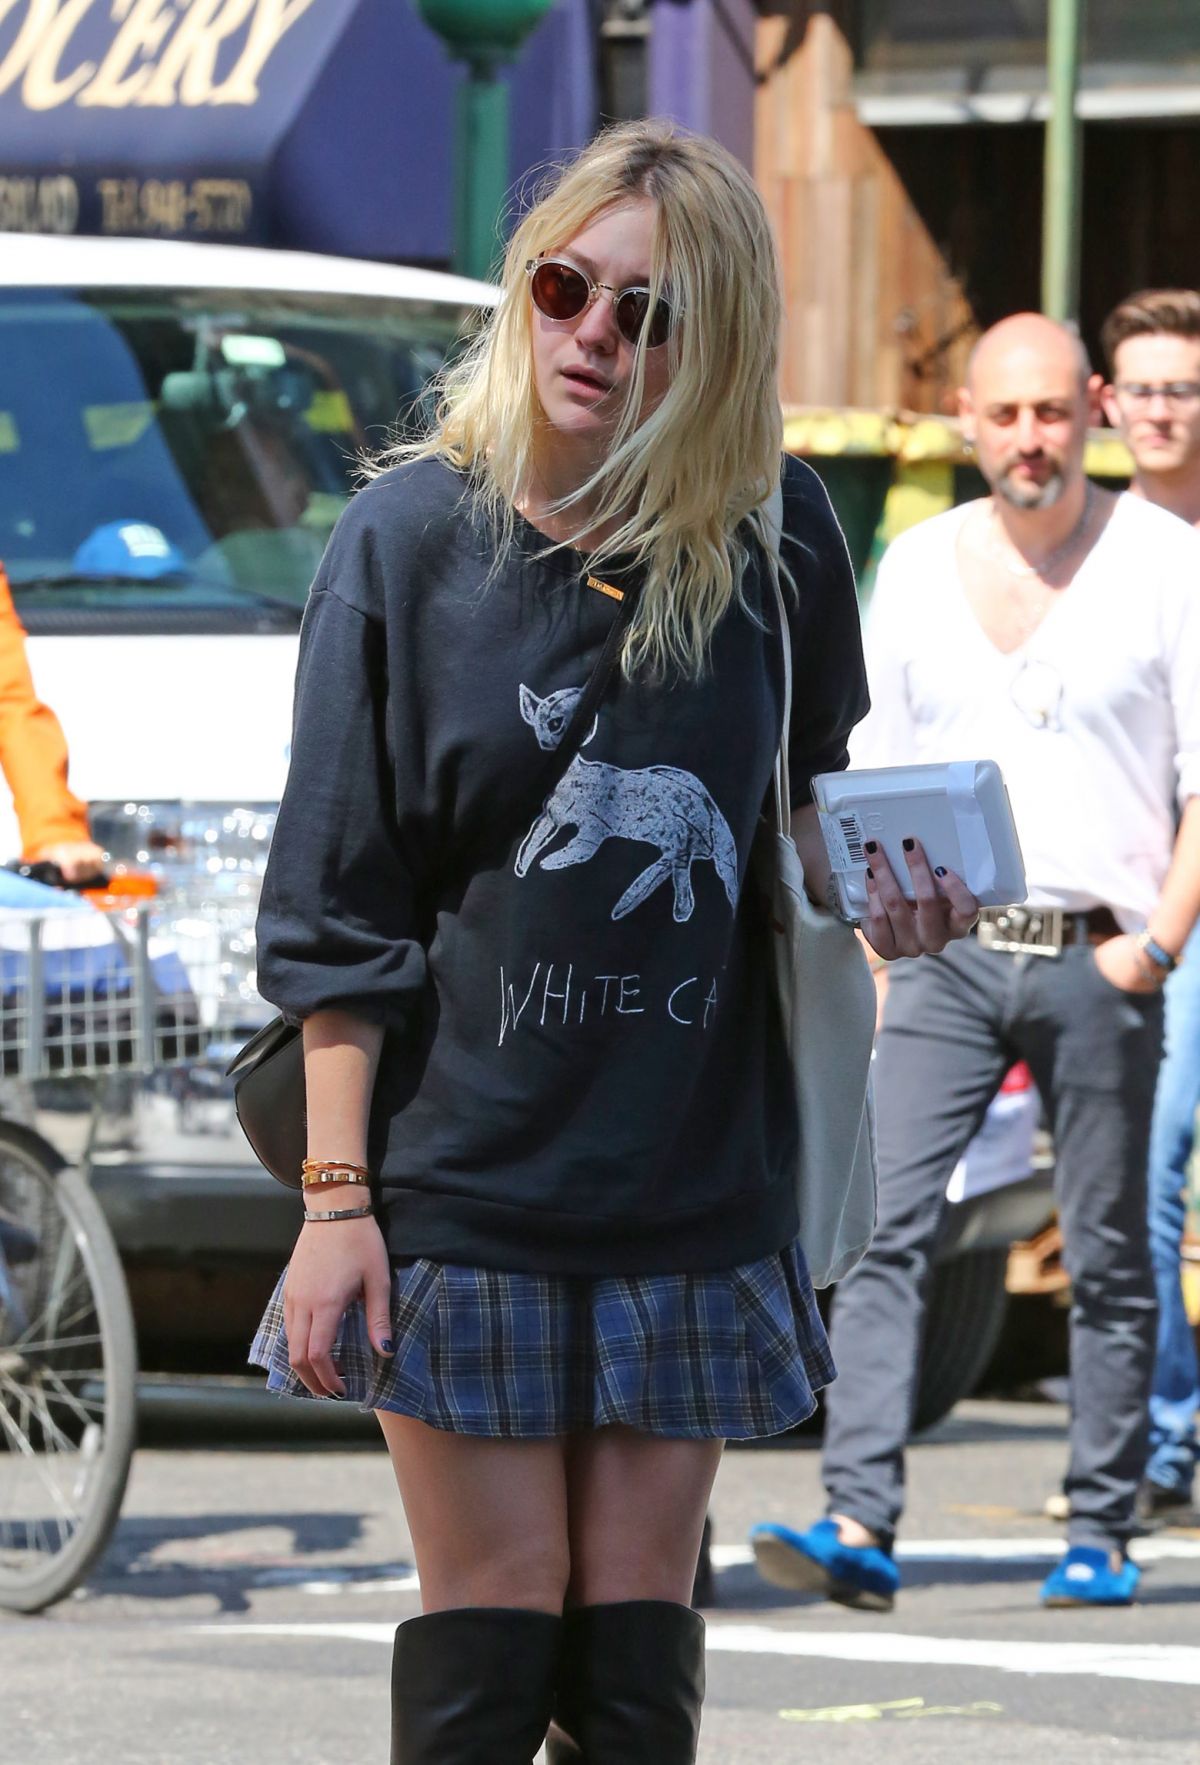 DAKOTA FANNING in Skirt Out and About in New York – HawtCelebs